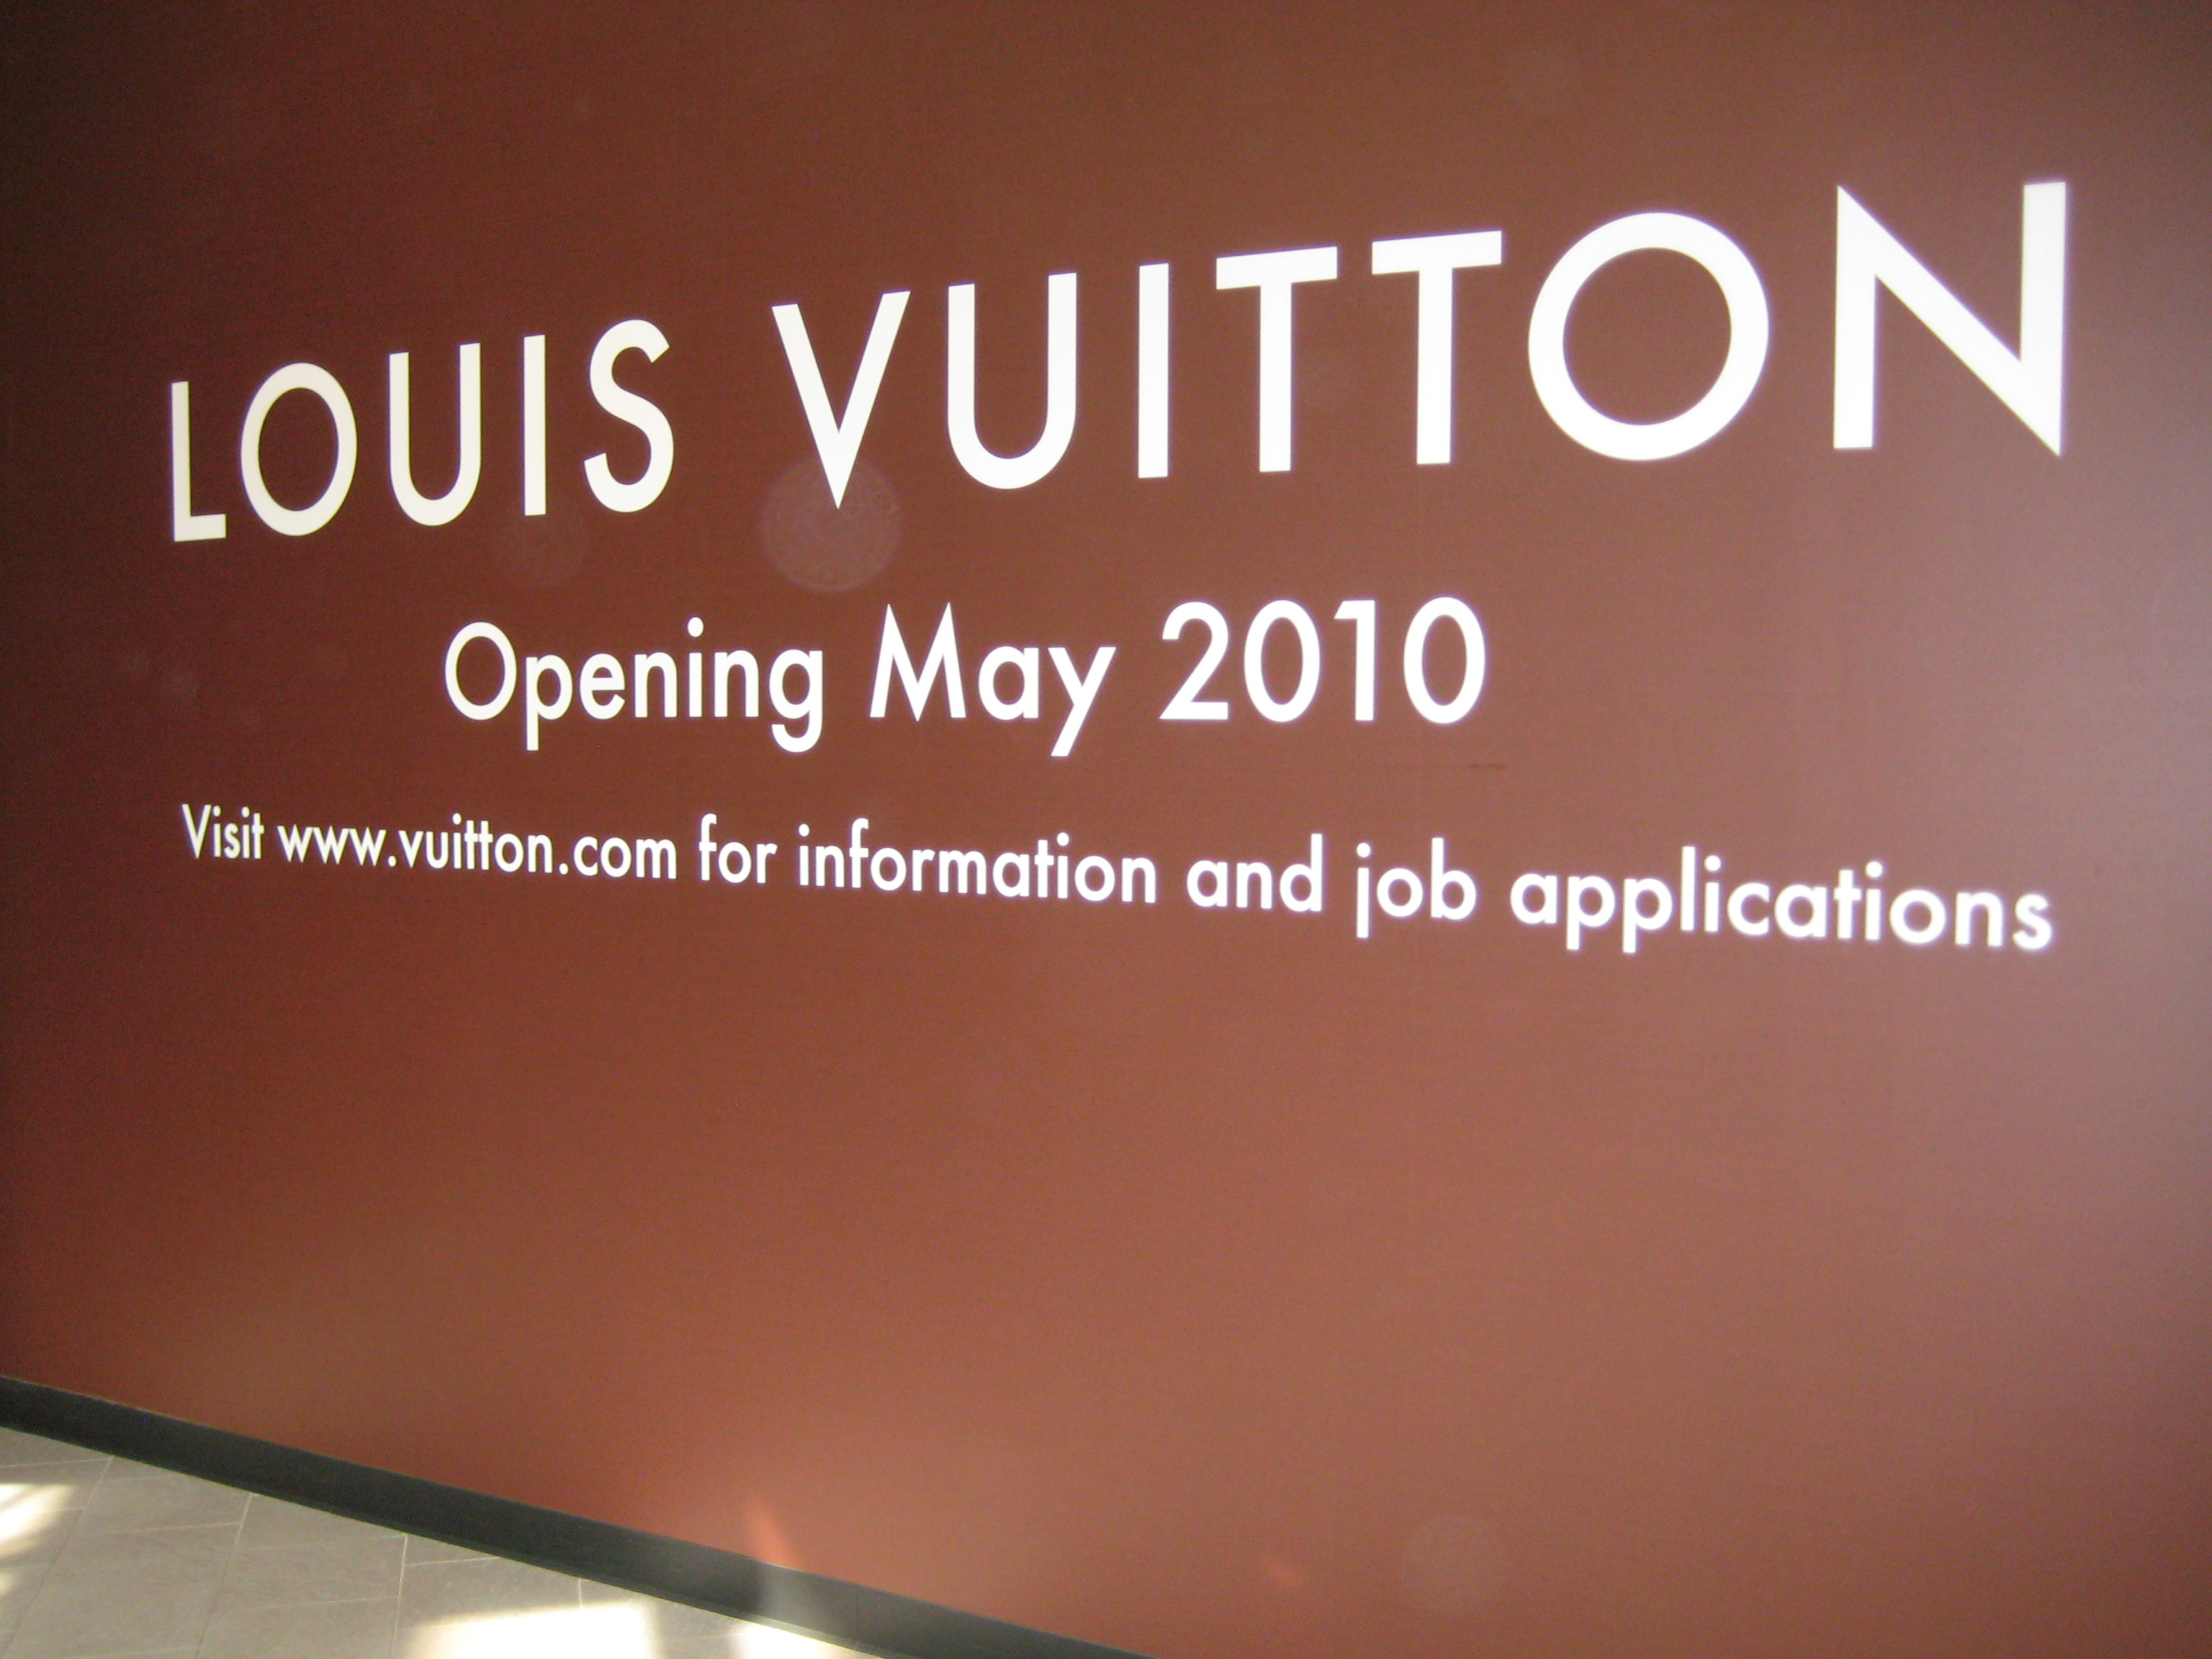 Louis Vuitton Opening in Galleria May 4 at 10 am!! | Shareology